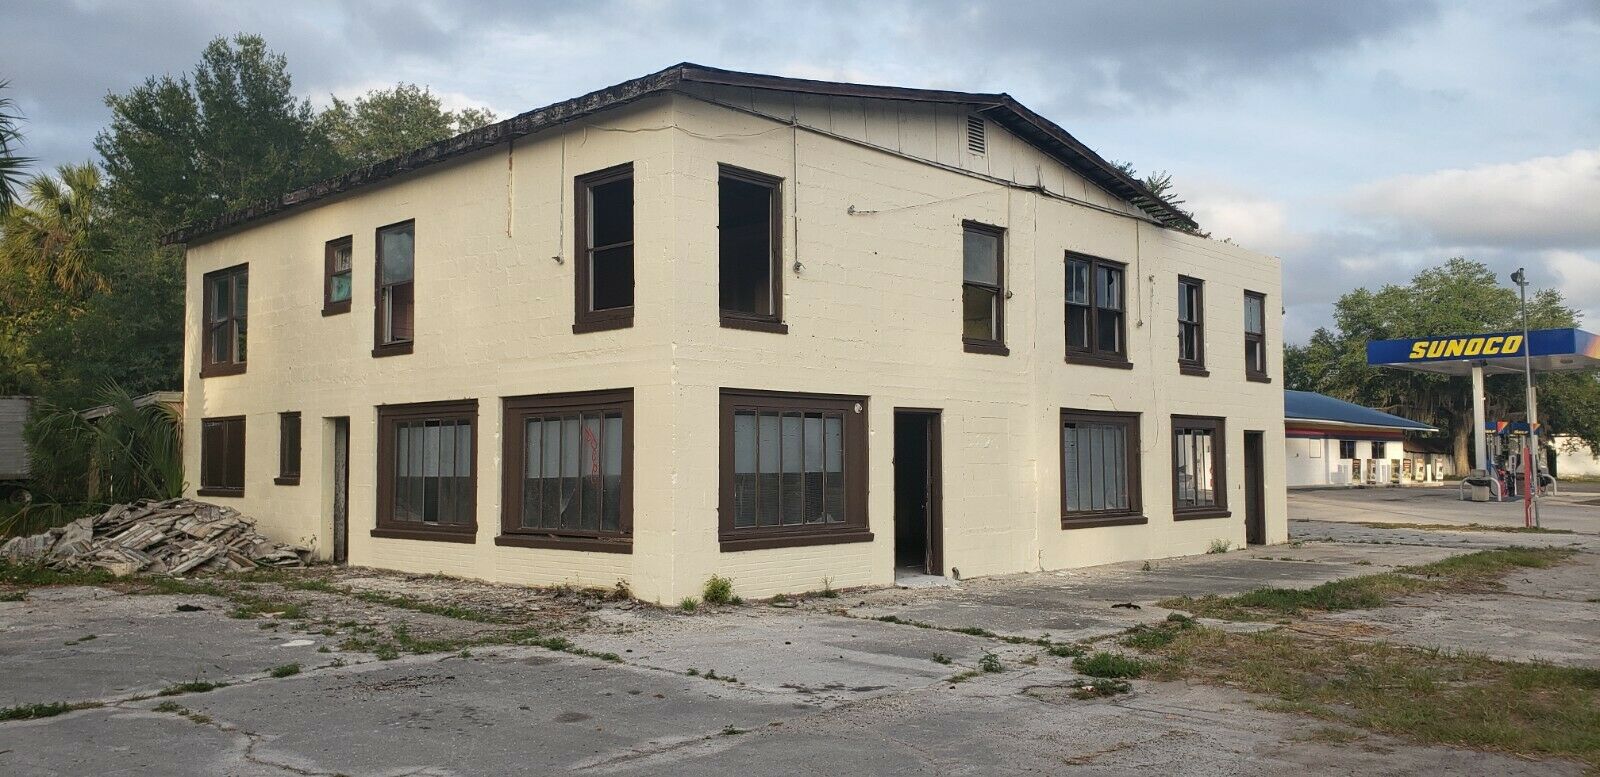 Investor Special - Two Story Commercial Building On 1/2 Acre